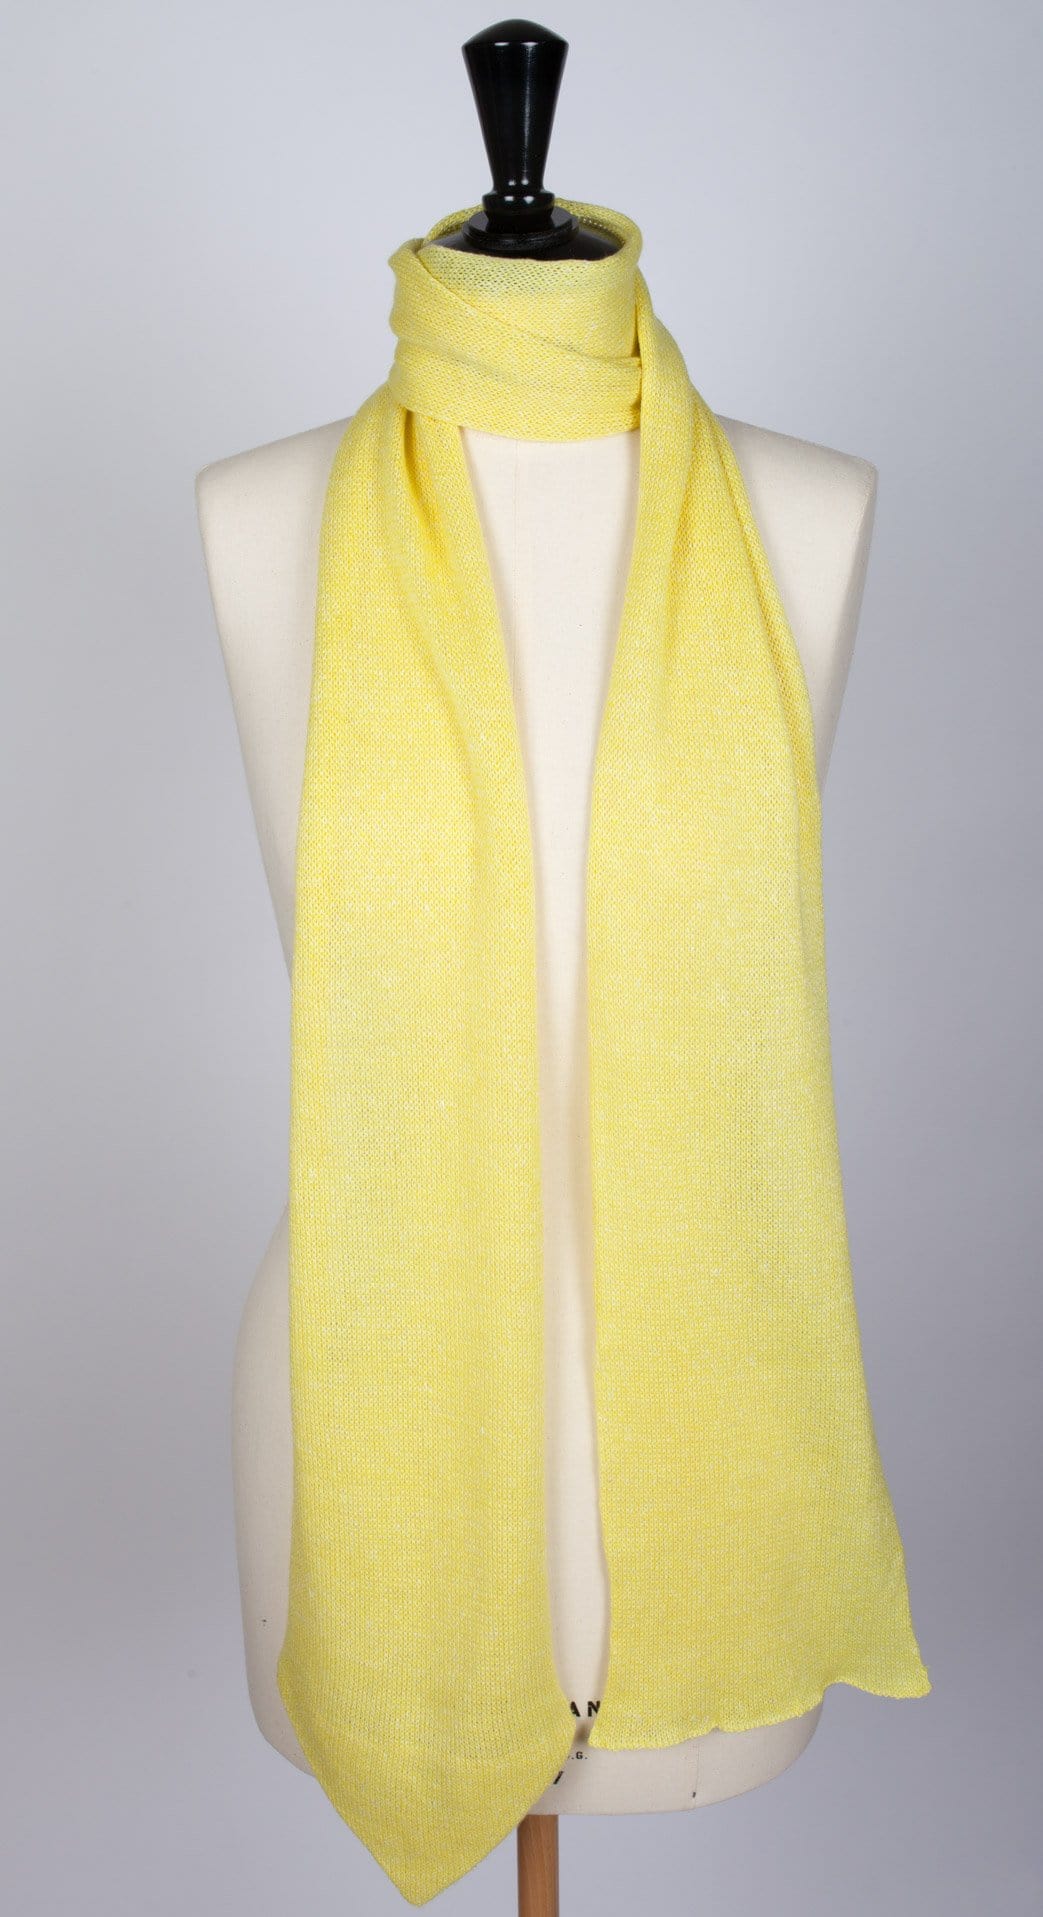 Echarpe Evesome 58% cachemire 42% lin à bout cravate -  Evesome scarf 58% cashmere 42% linen with tie